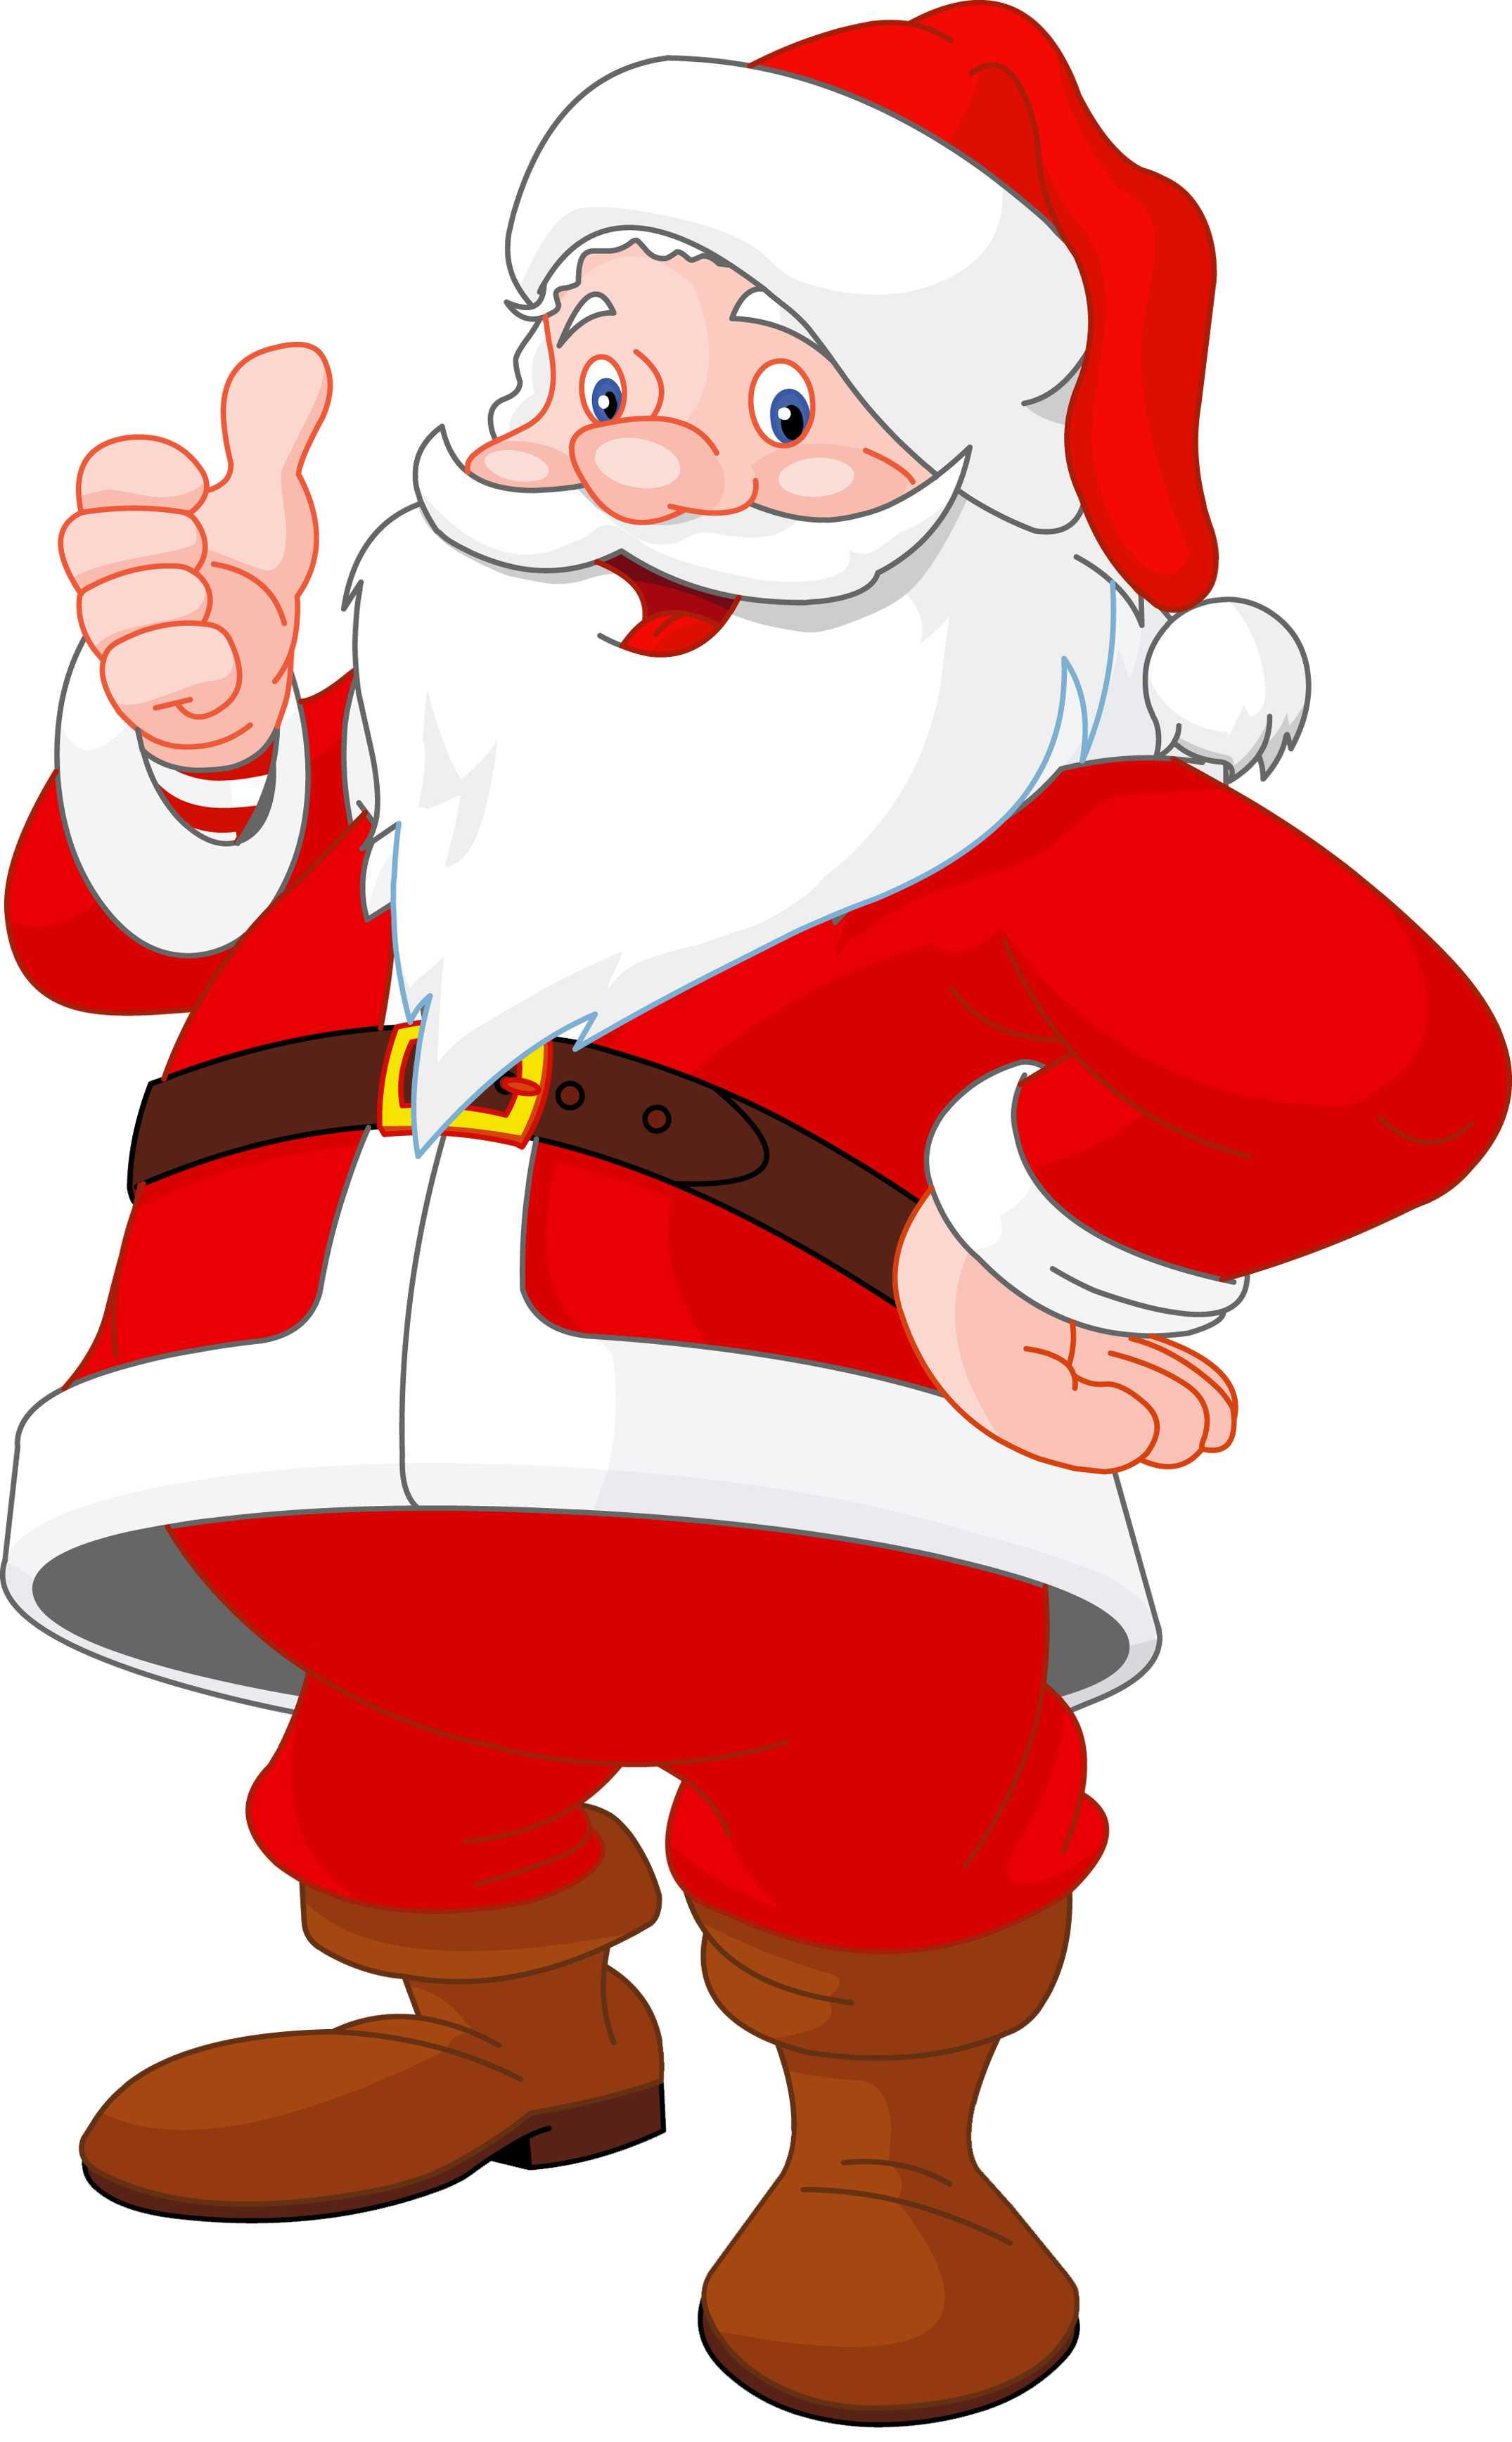 Glove clipart santa claus. Bagel yeah another blogger